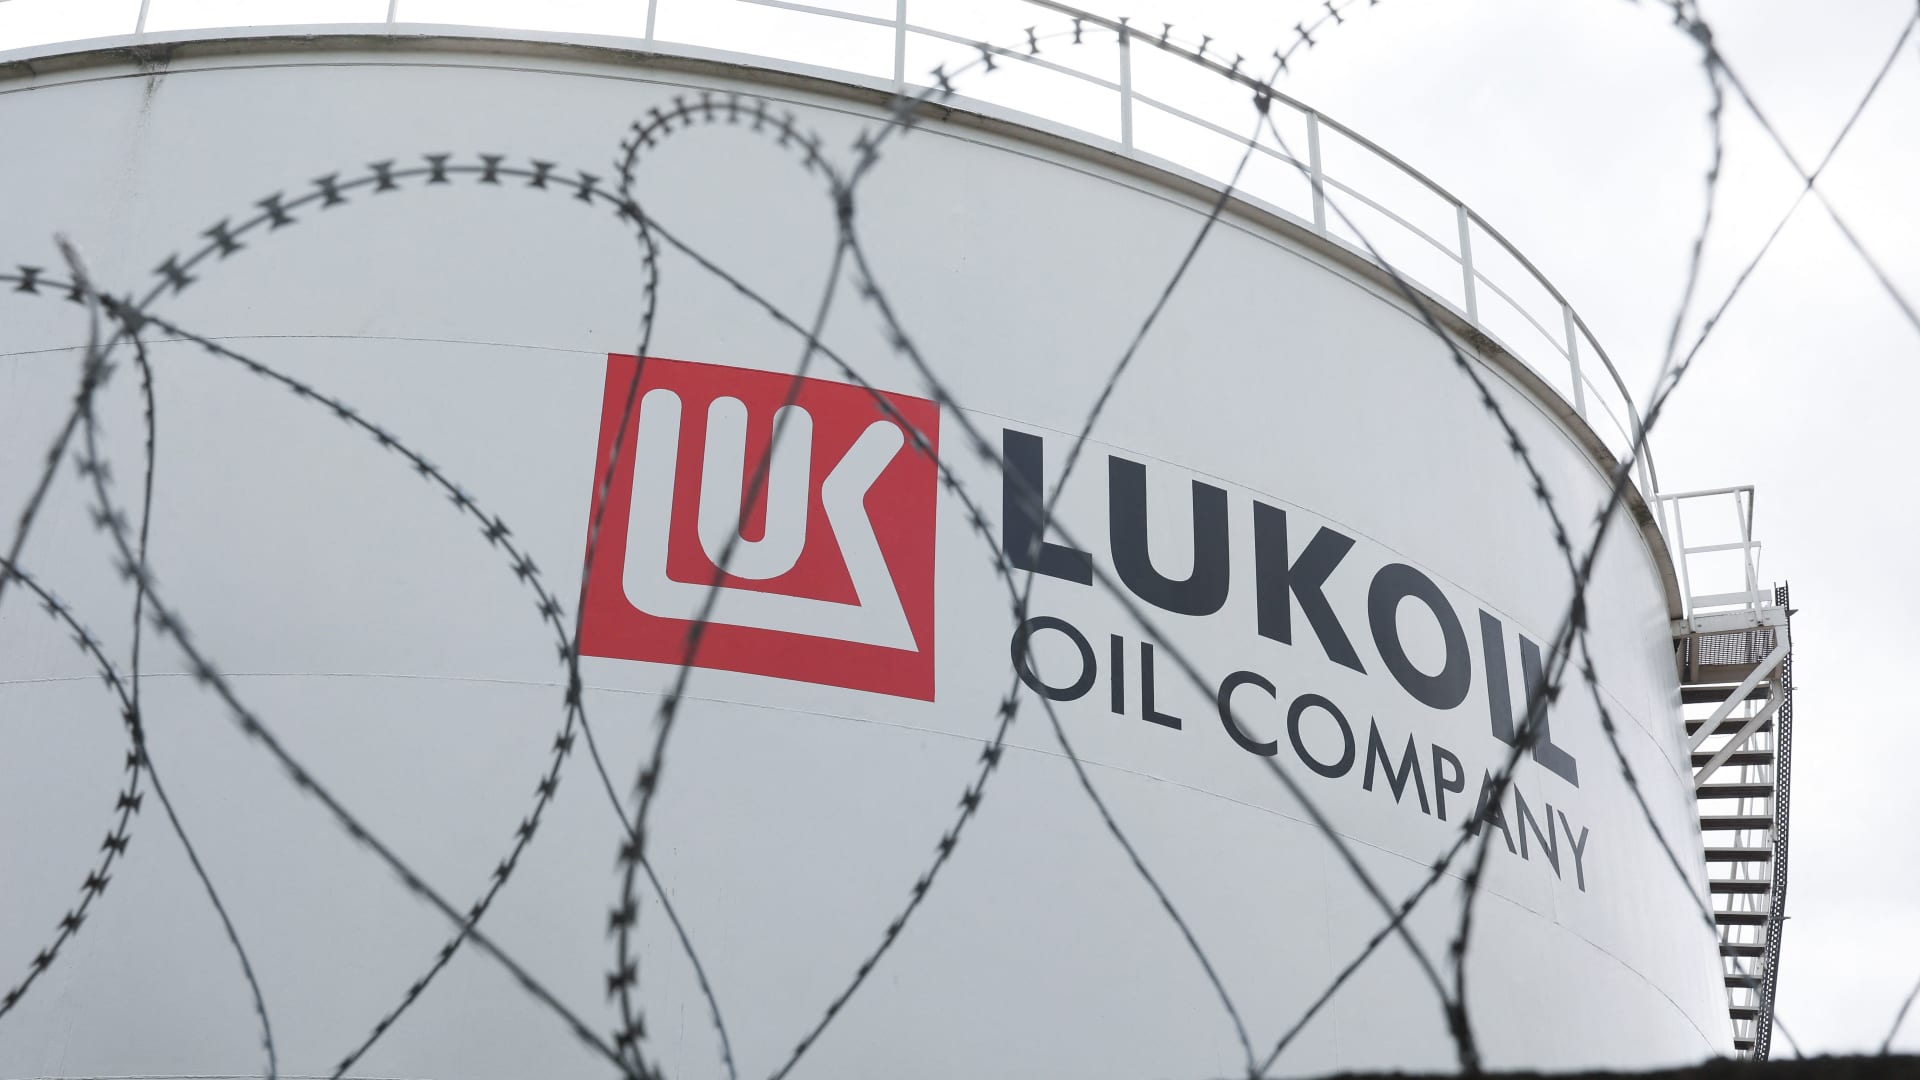 This photograph taken on May 13, 2022 shows a view of Russian oil company Lukoil fuel storage tank in Brussels.